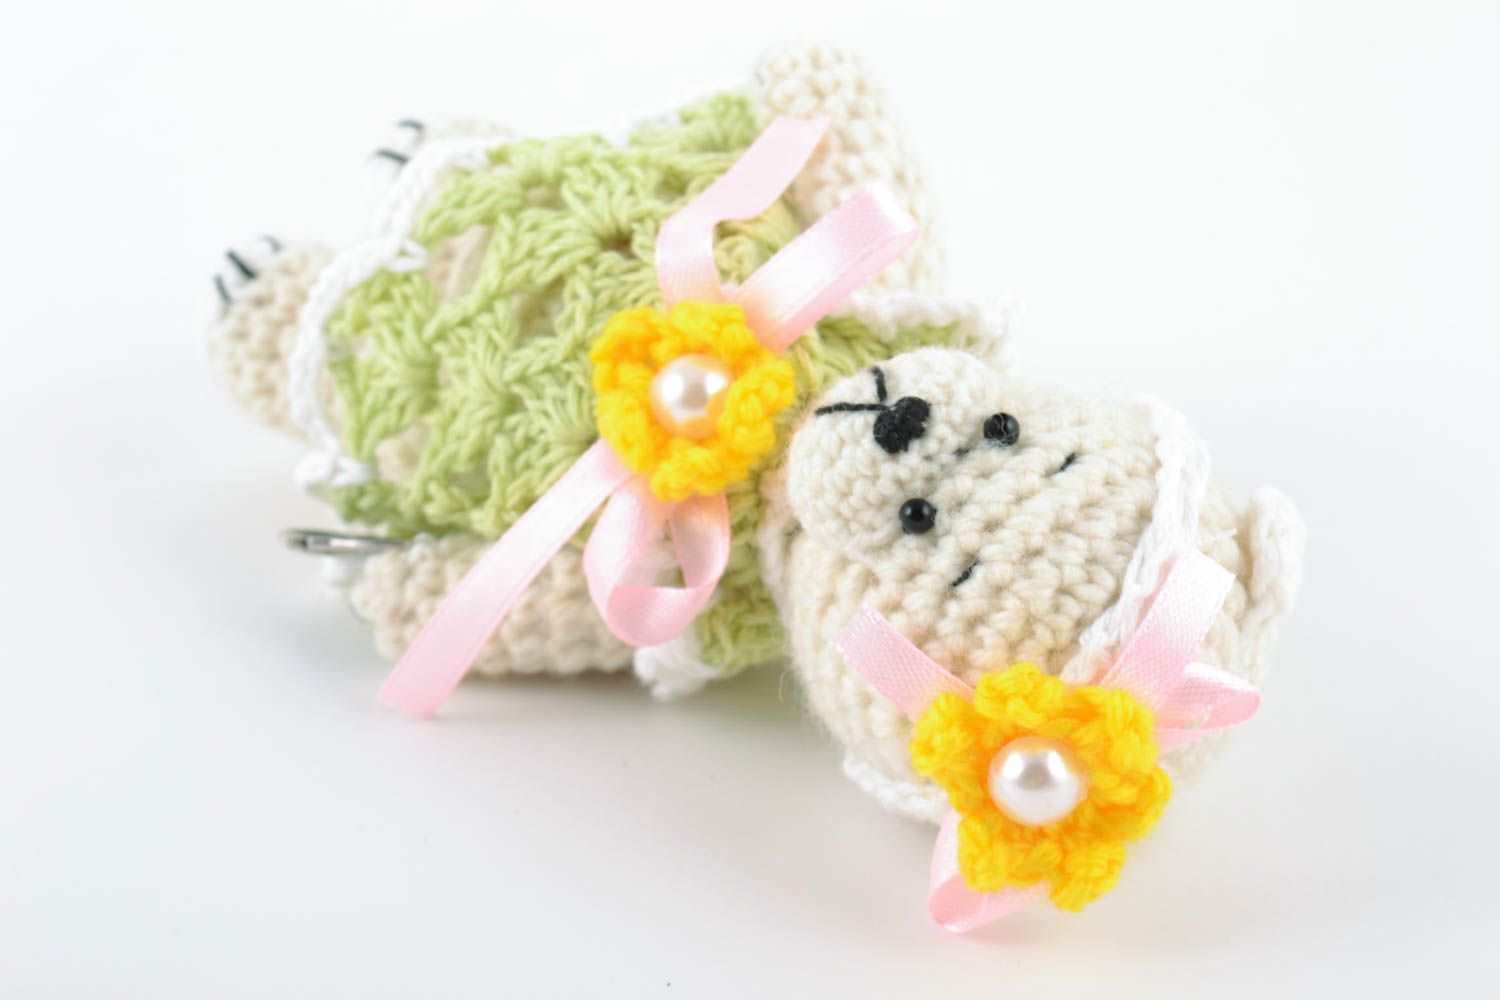 Handmade crocheted soft toy made of wool for children and home interior photo 4